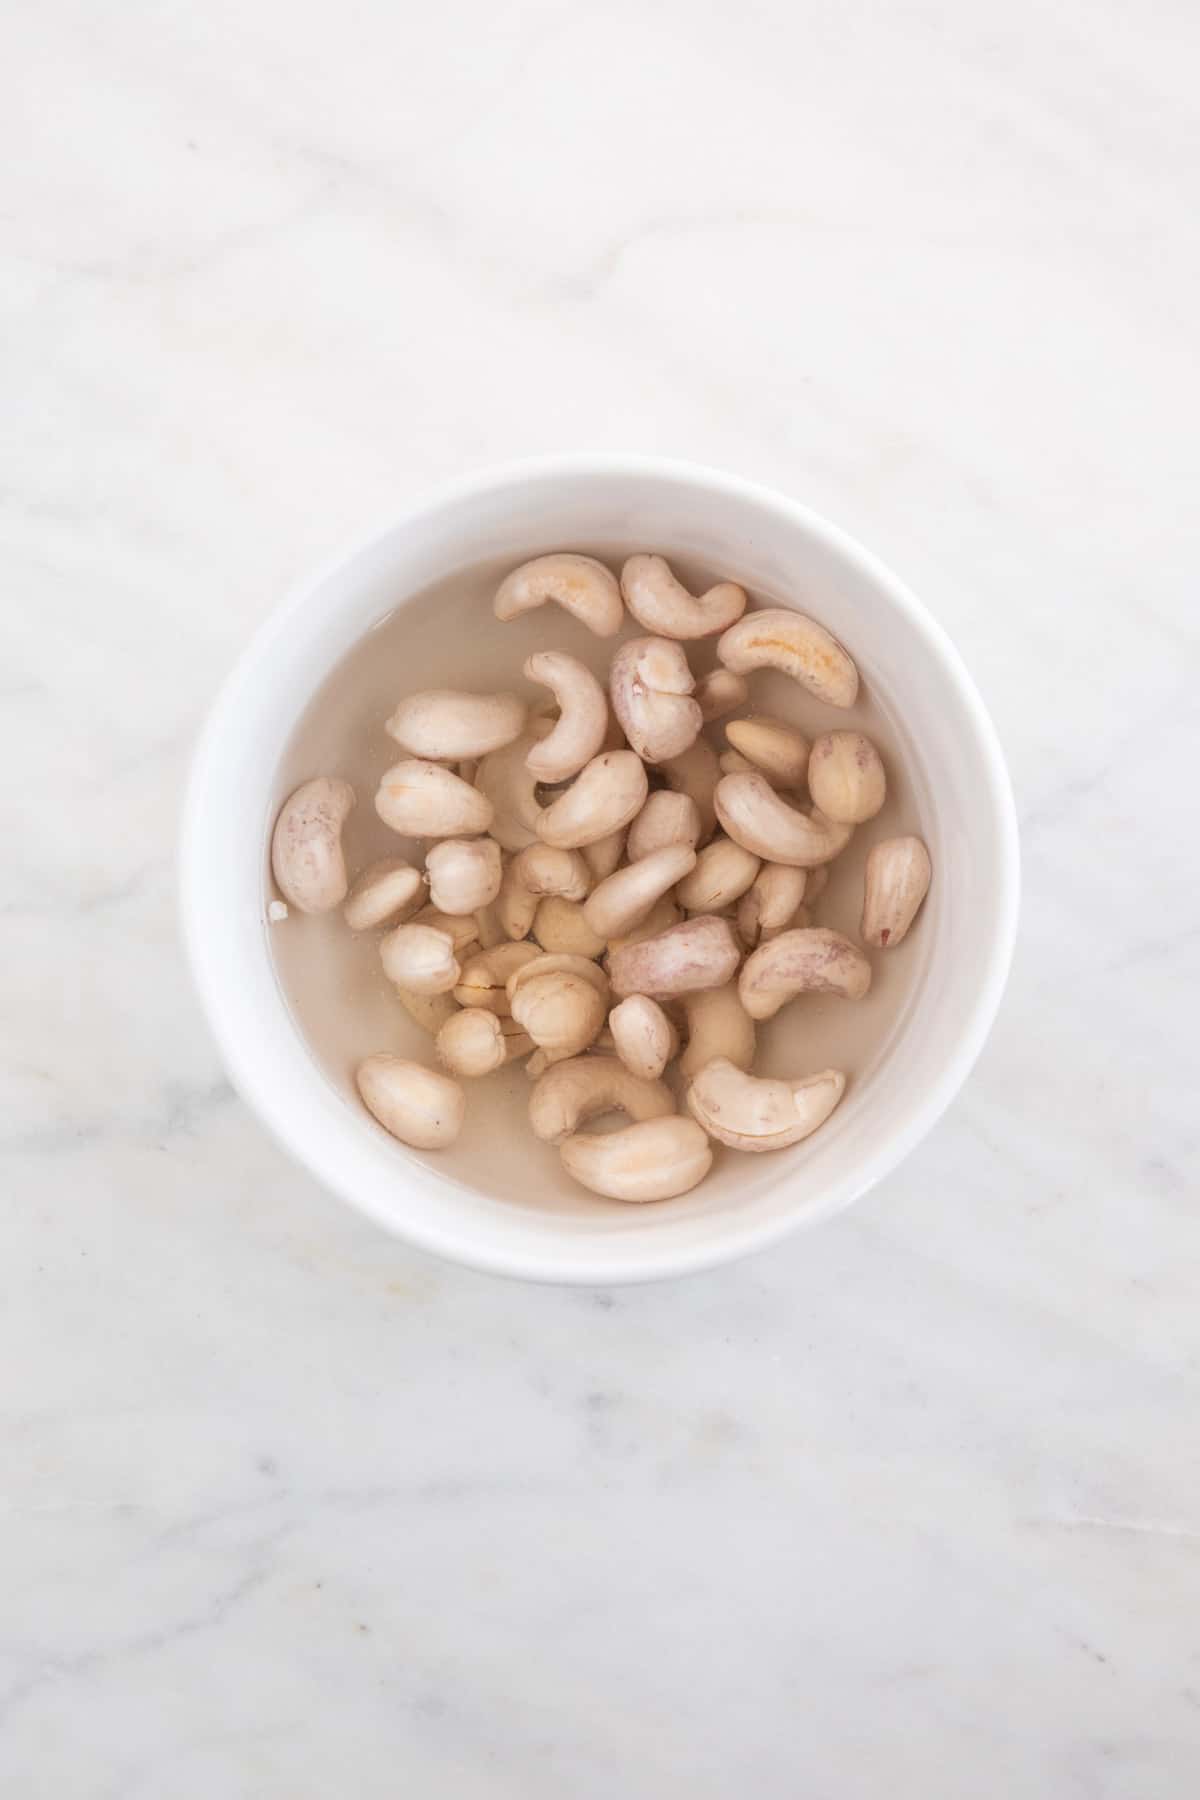 A bowl of cashews soaking in water.